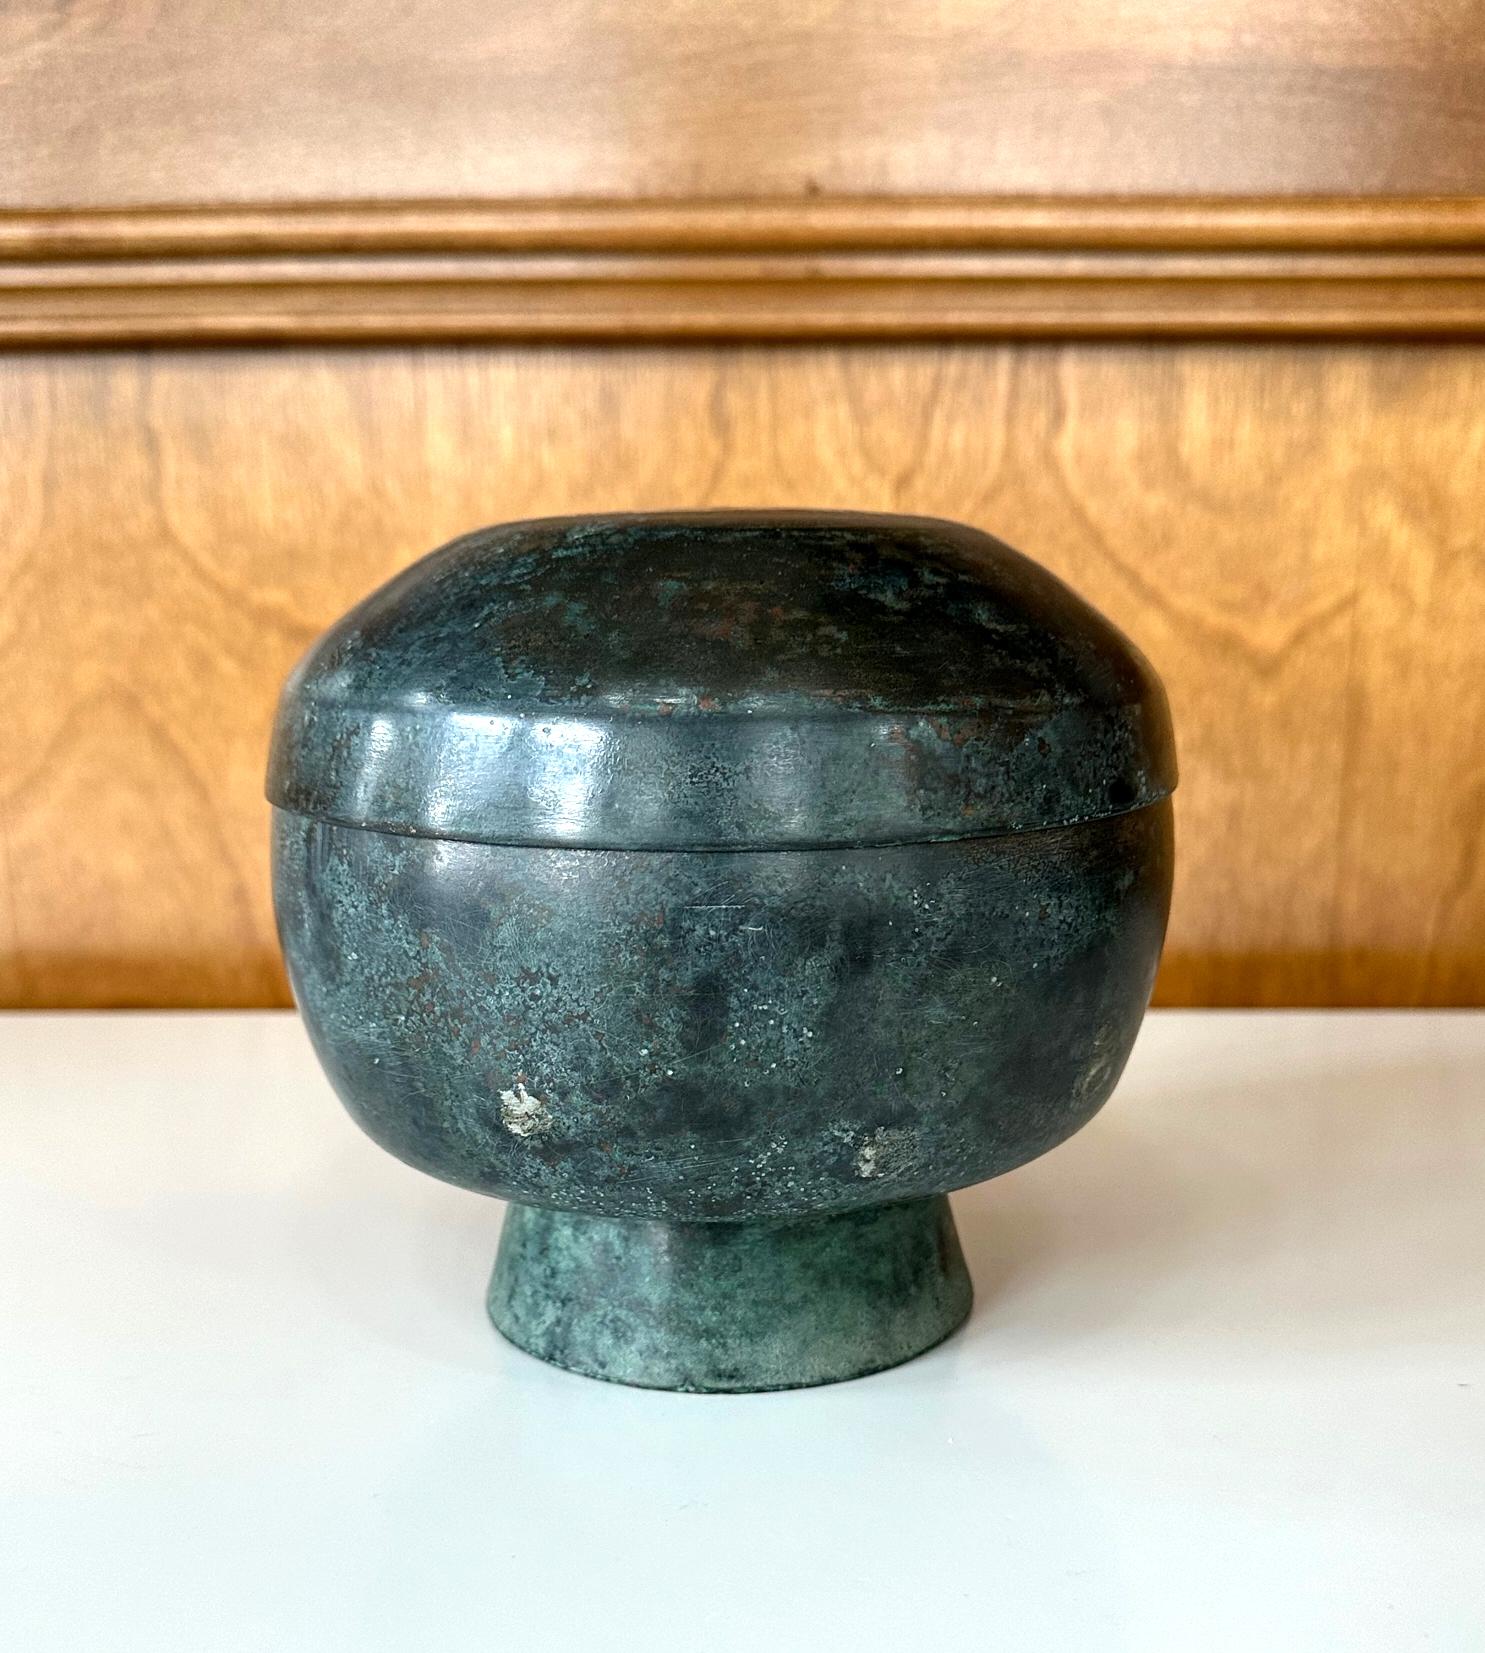 A bronze bowl shape vessel with fitted lid from Korean dated to 15-16th century (early Joseon Dynasty). In an elegant minimalistic form with thin wall and supported by a high foot ring, this flat top bowl was likely reserved for ritual use. The